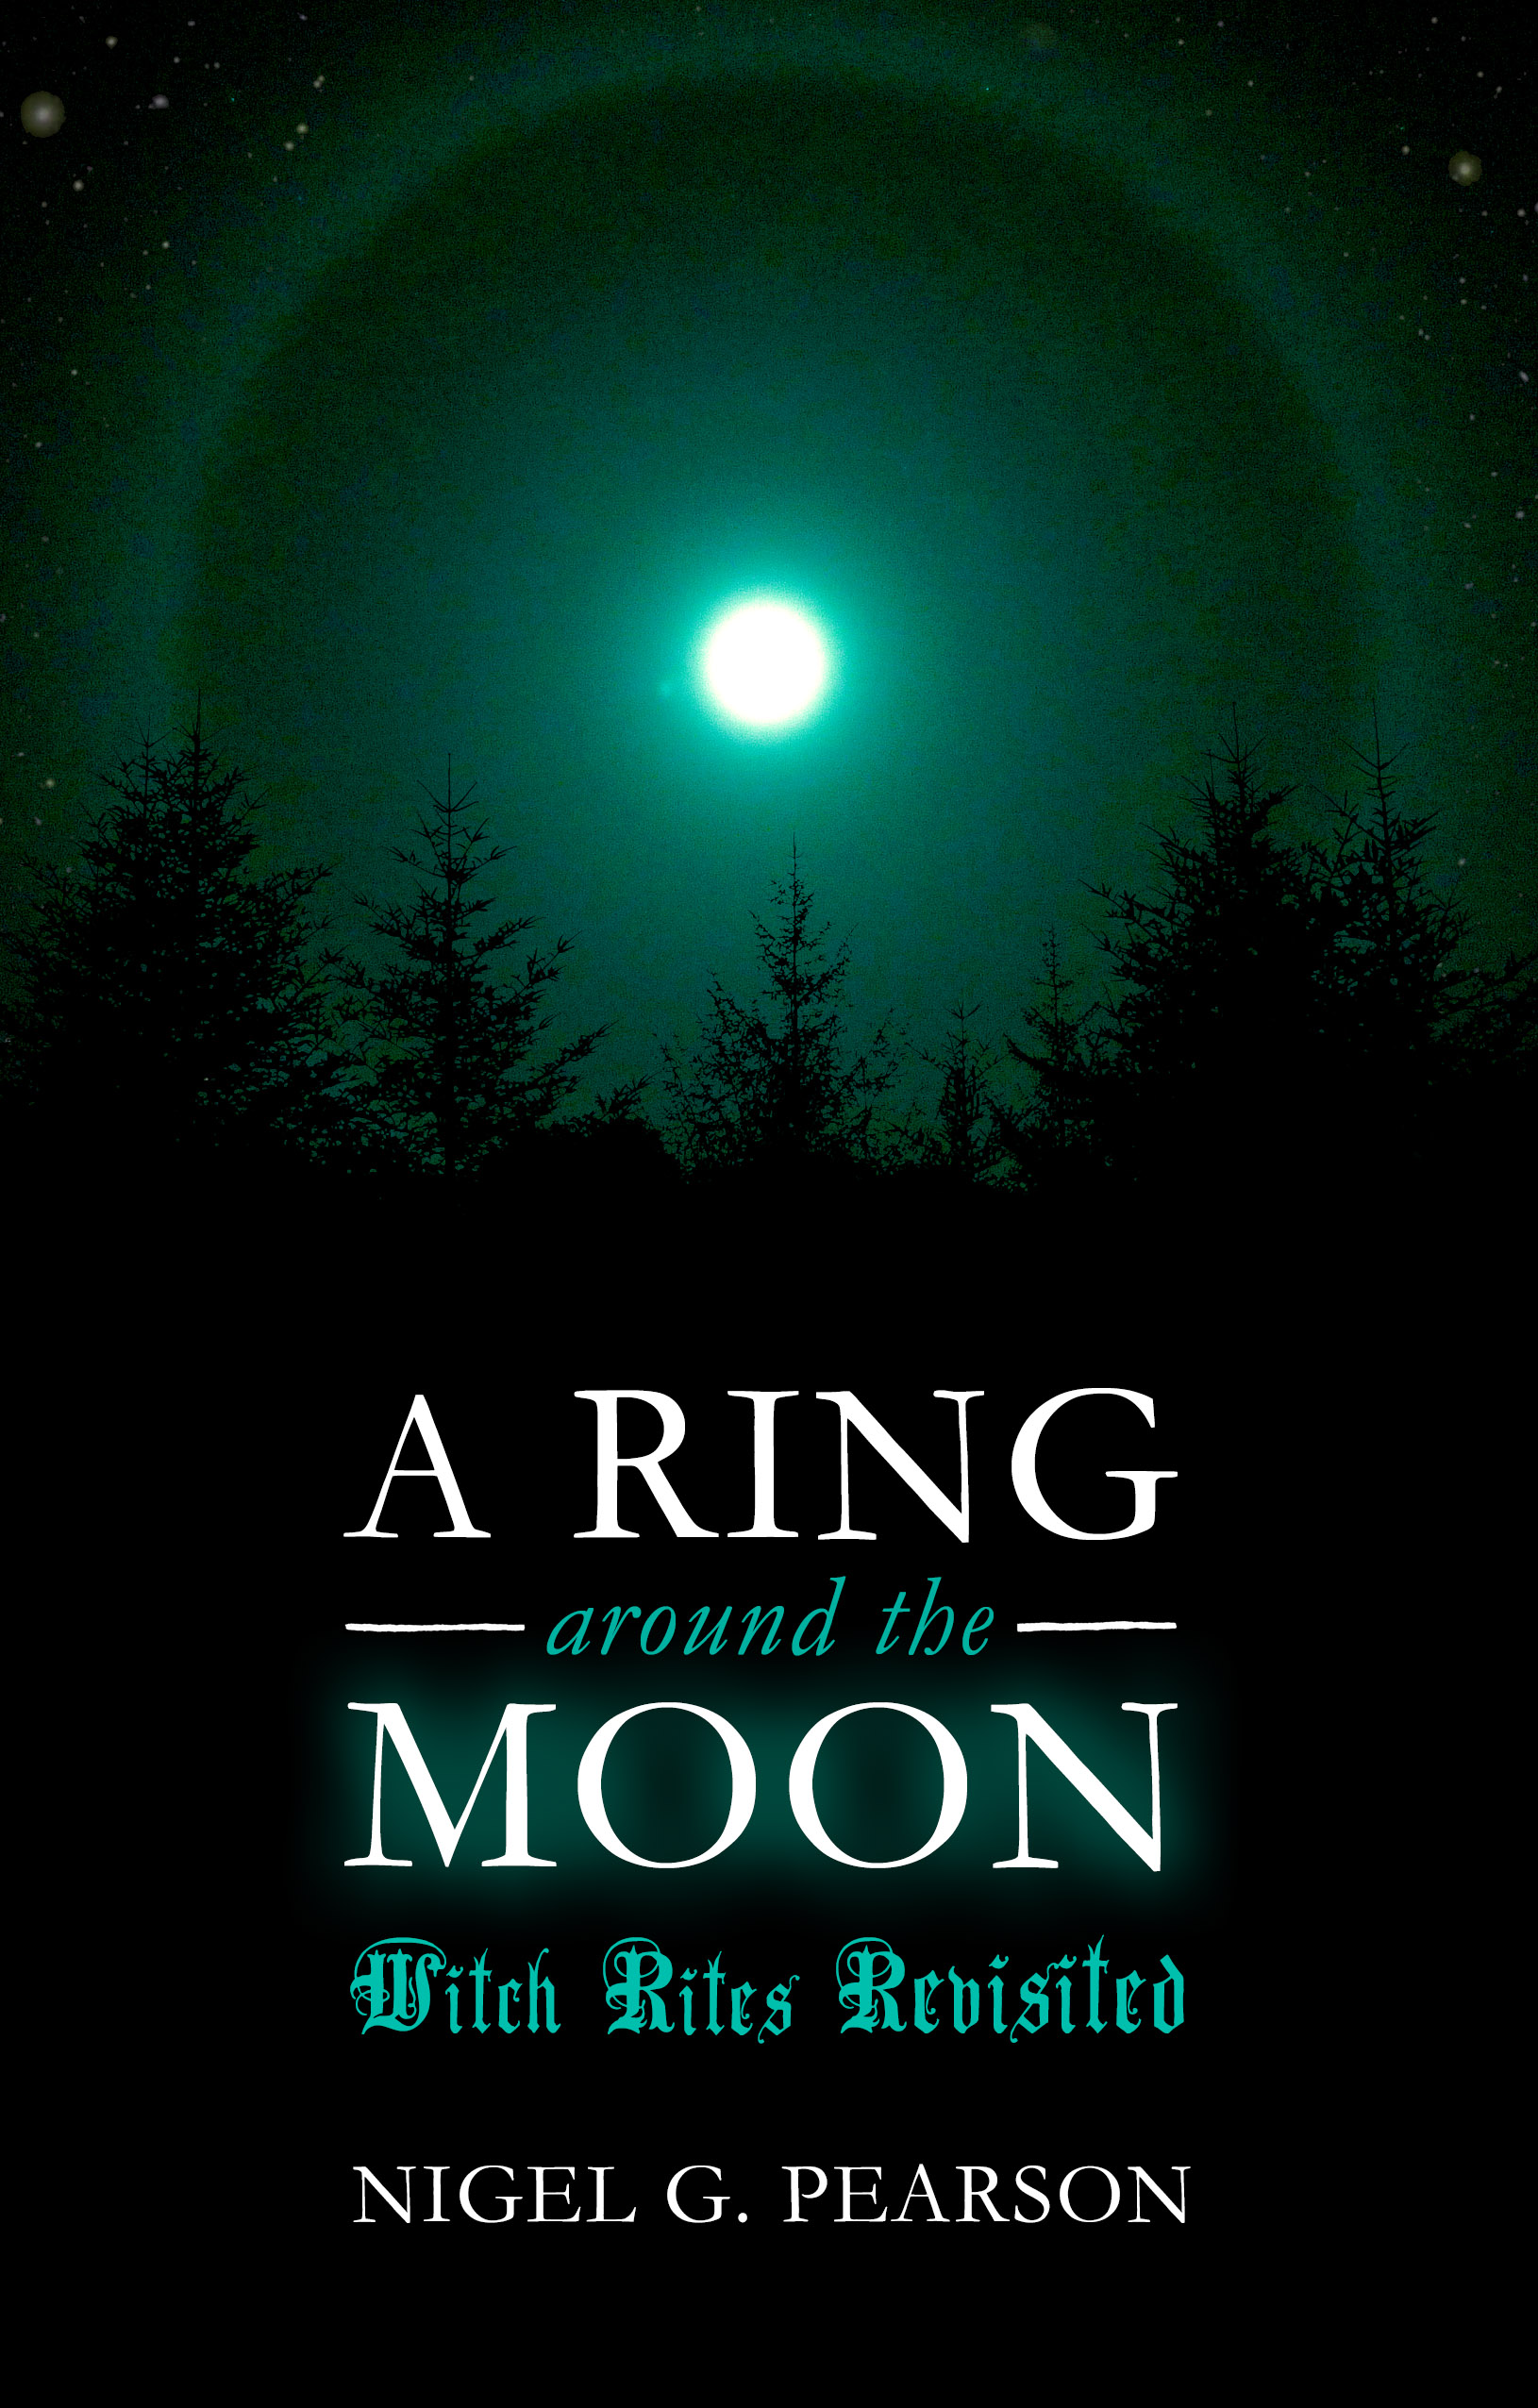 "A Ring Around the Moon: Witch Rites Revisited", by Nigel G. Pearson. Paperback edition.